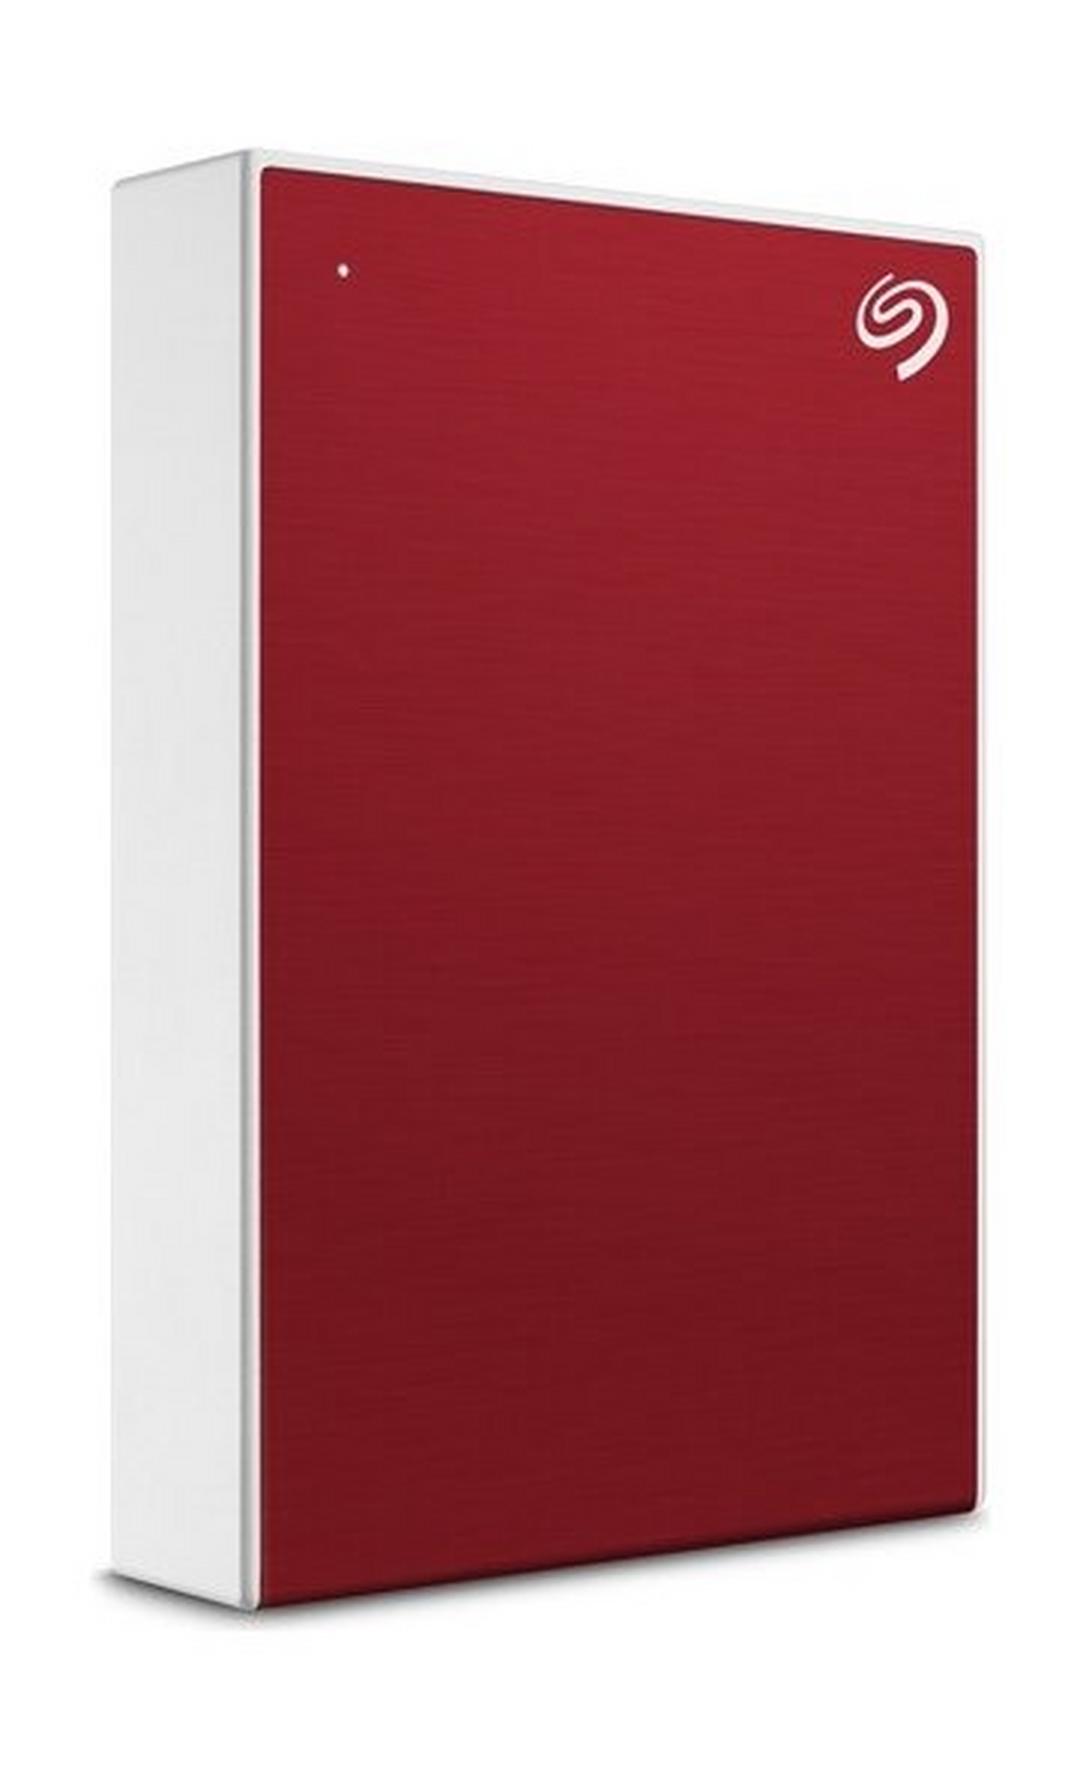 Seagate One Touch 1TB USB 3.2 Gen 1 External Hard Drive - Red